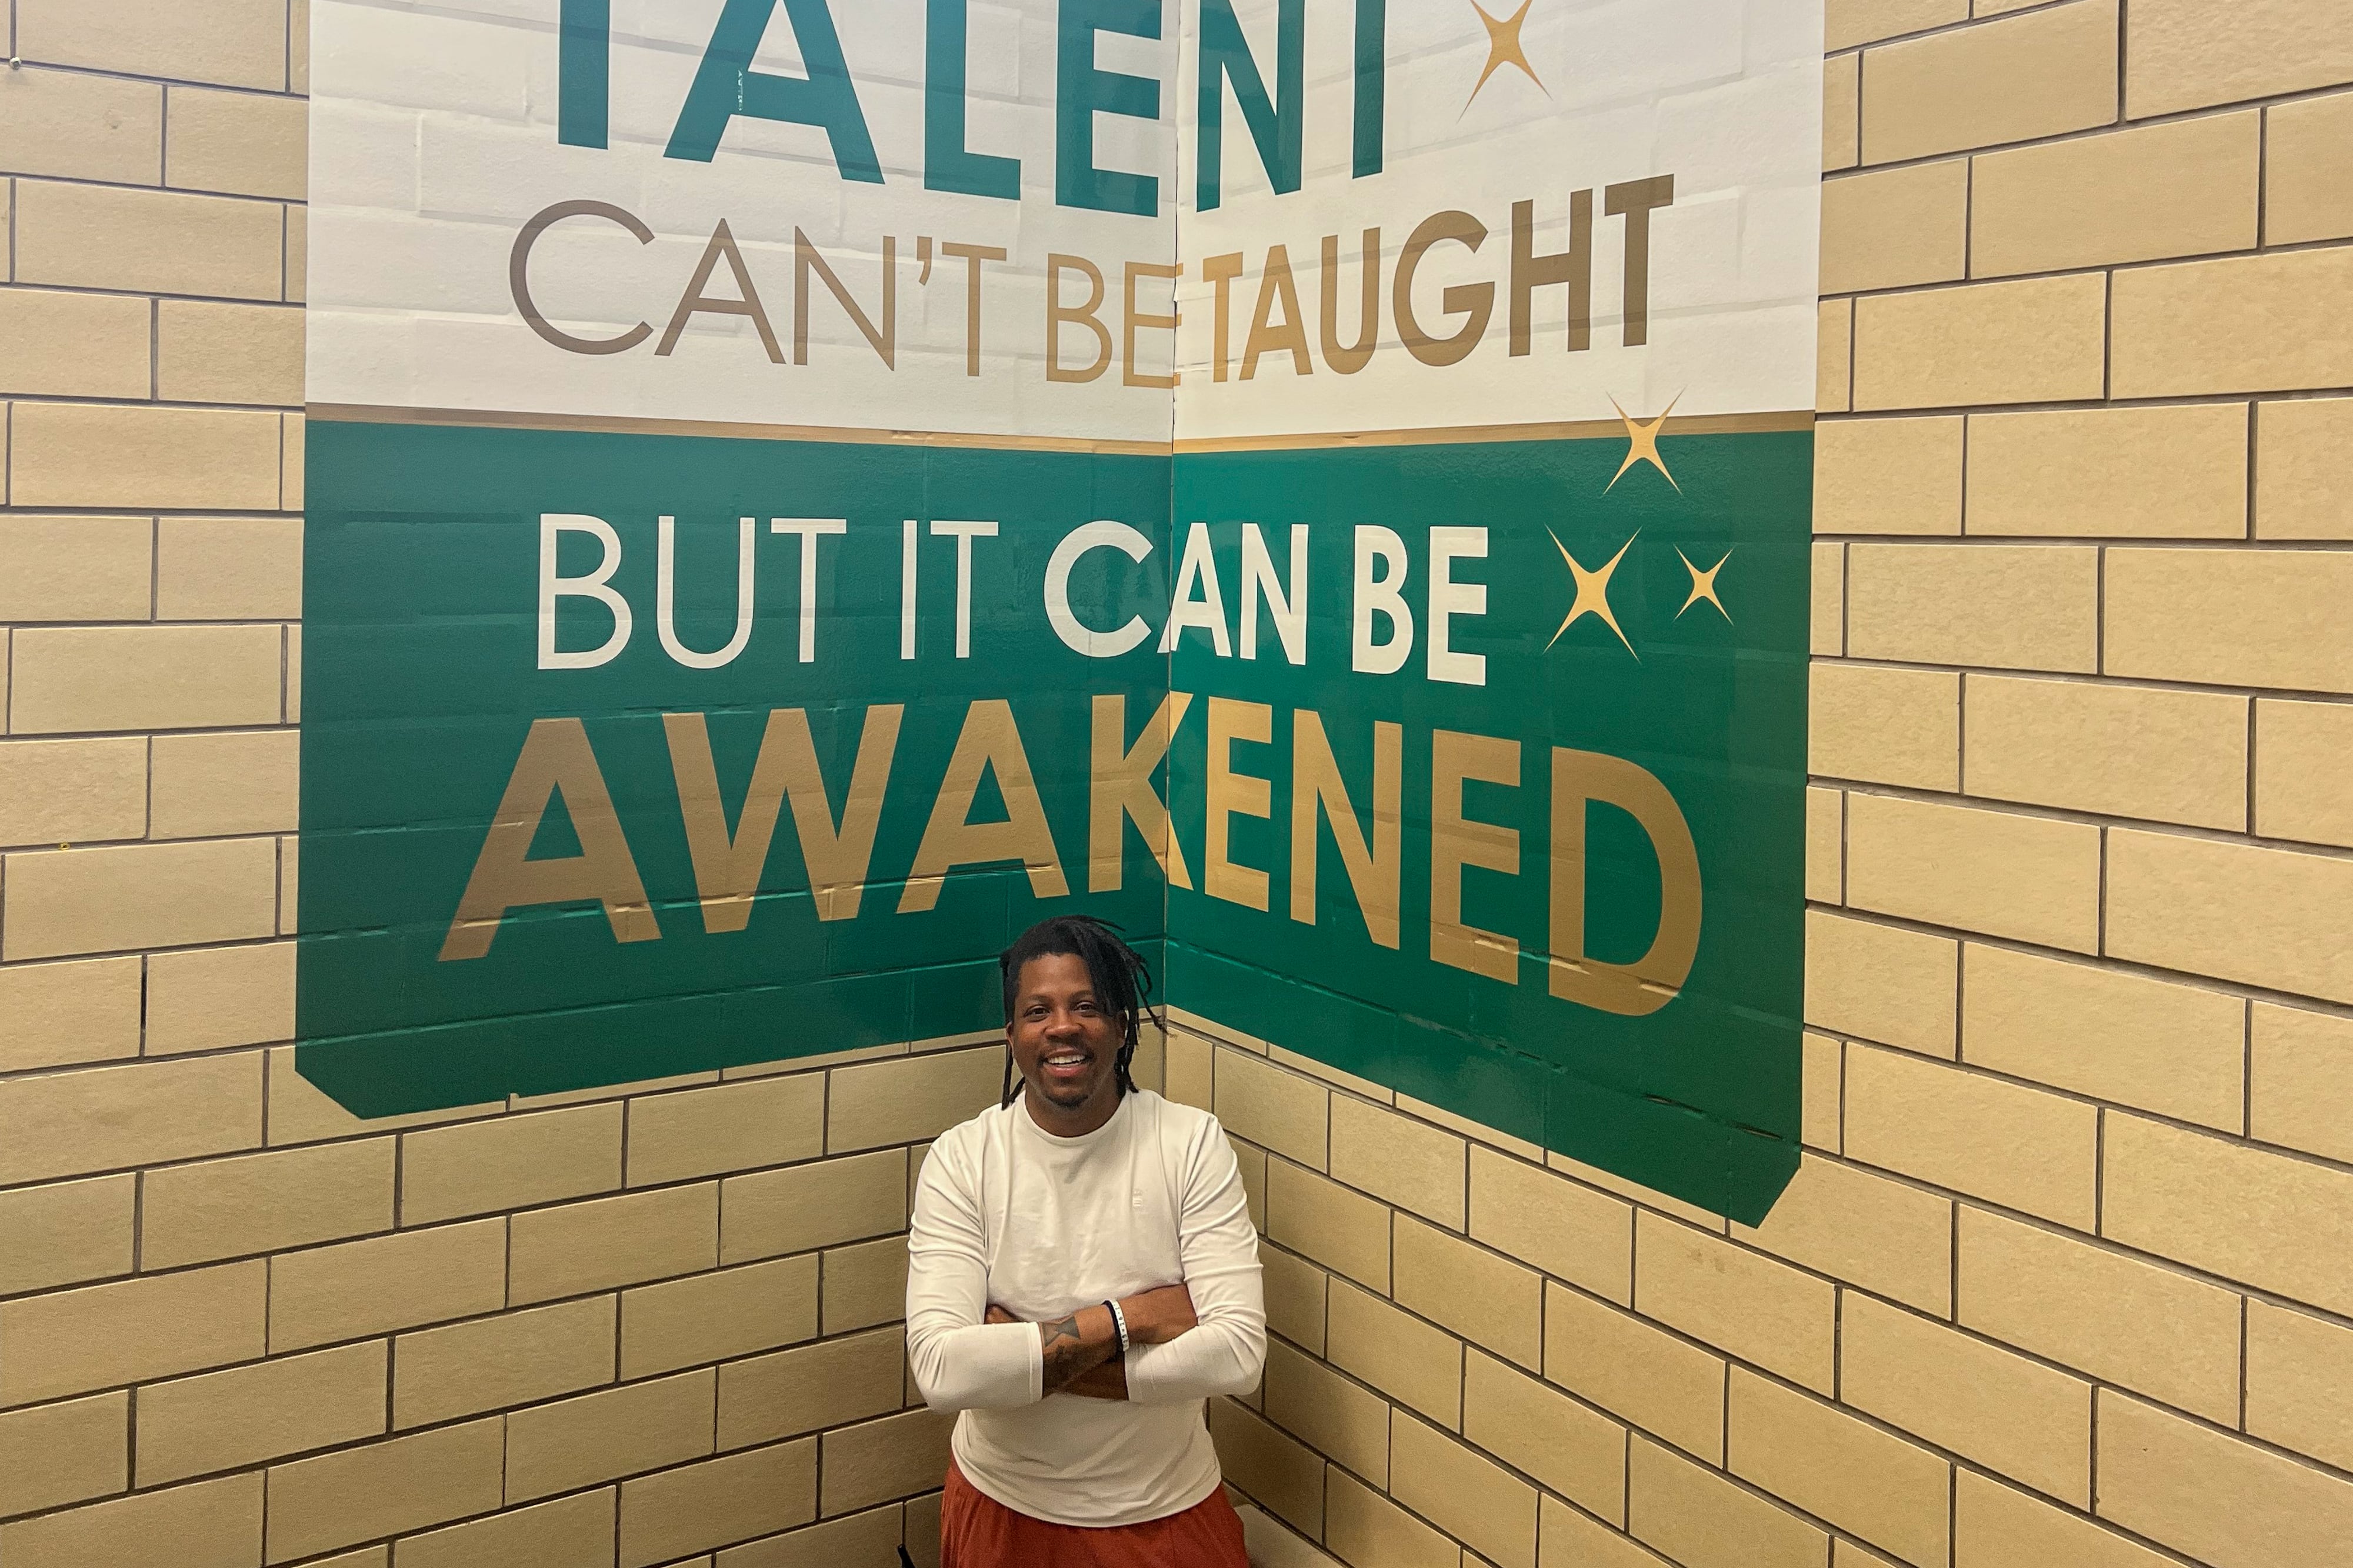 A principal stands under a green and white sign that says “Talent cant’ be taught, but it can be awakened.”